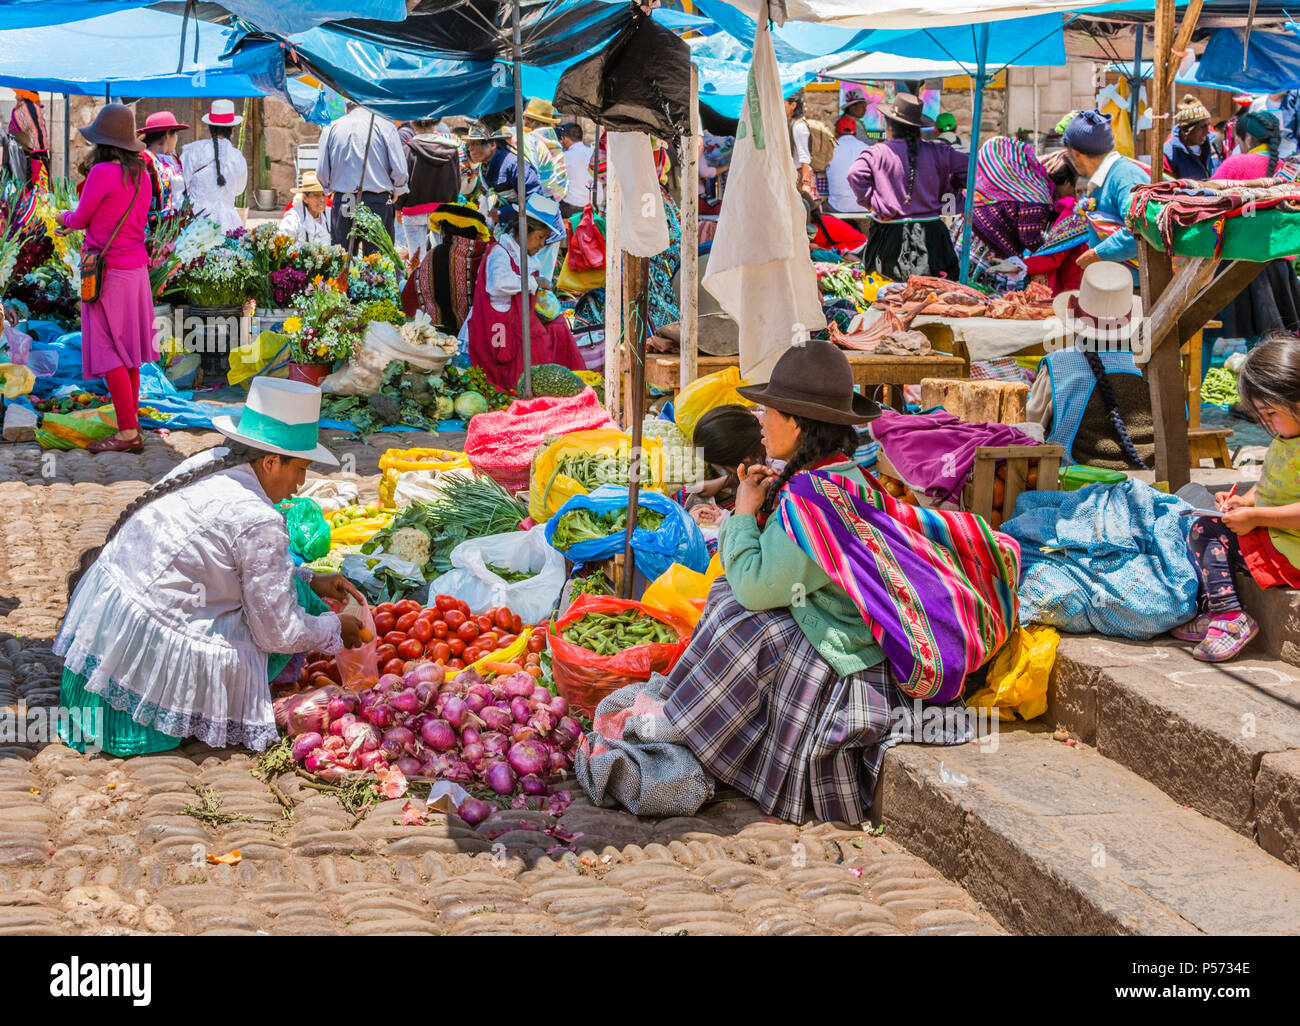 Pisac market, Pisac Peru, Peruvian women in colorful traditional clothing sell vegetables at local South American market. Stock Photo